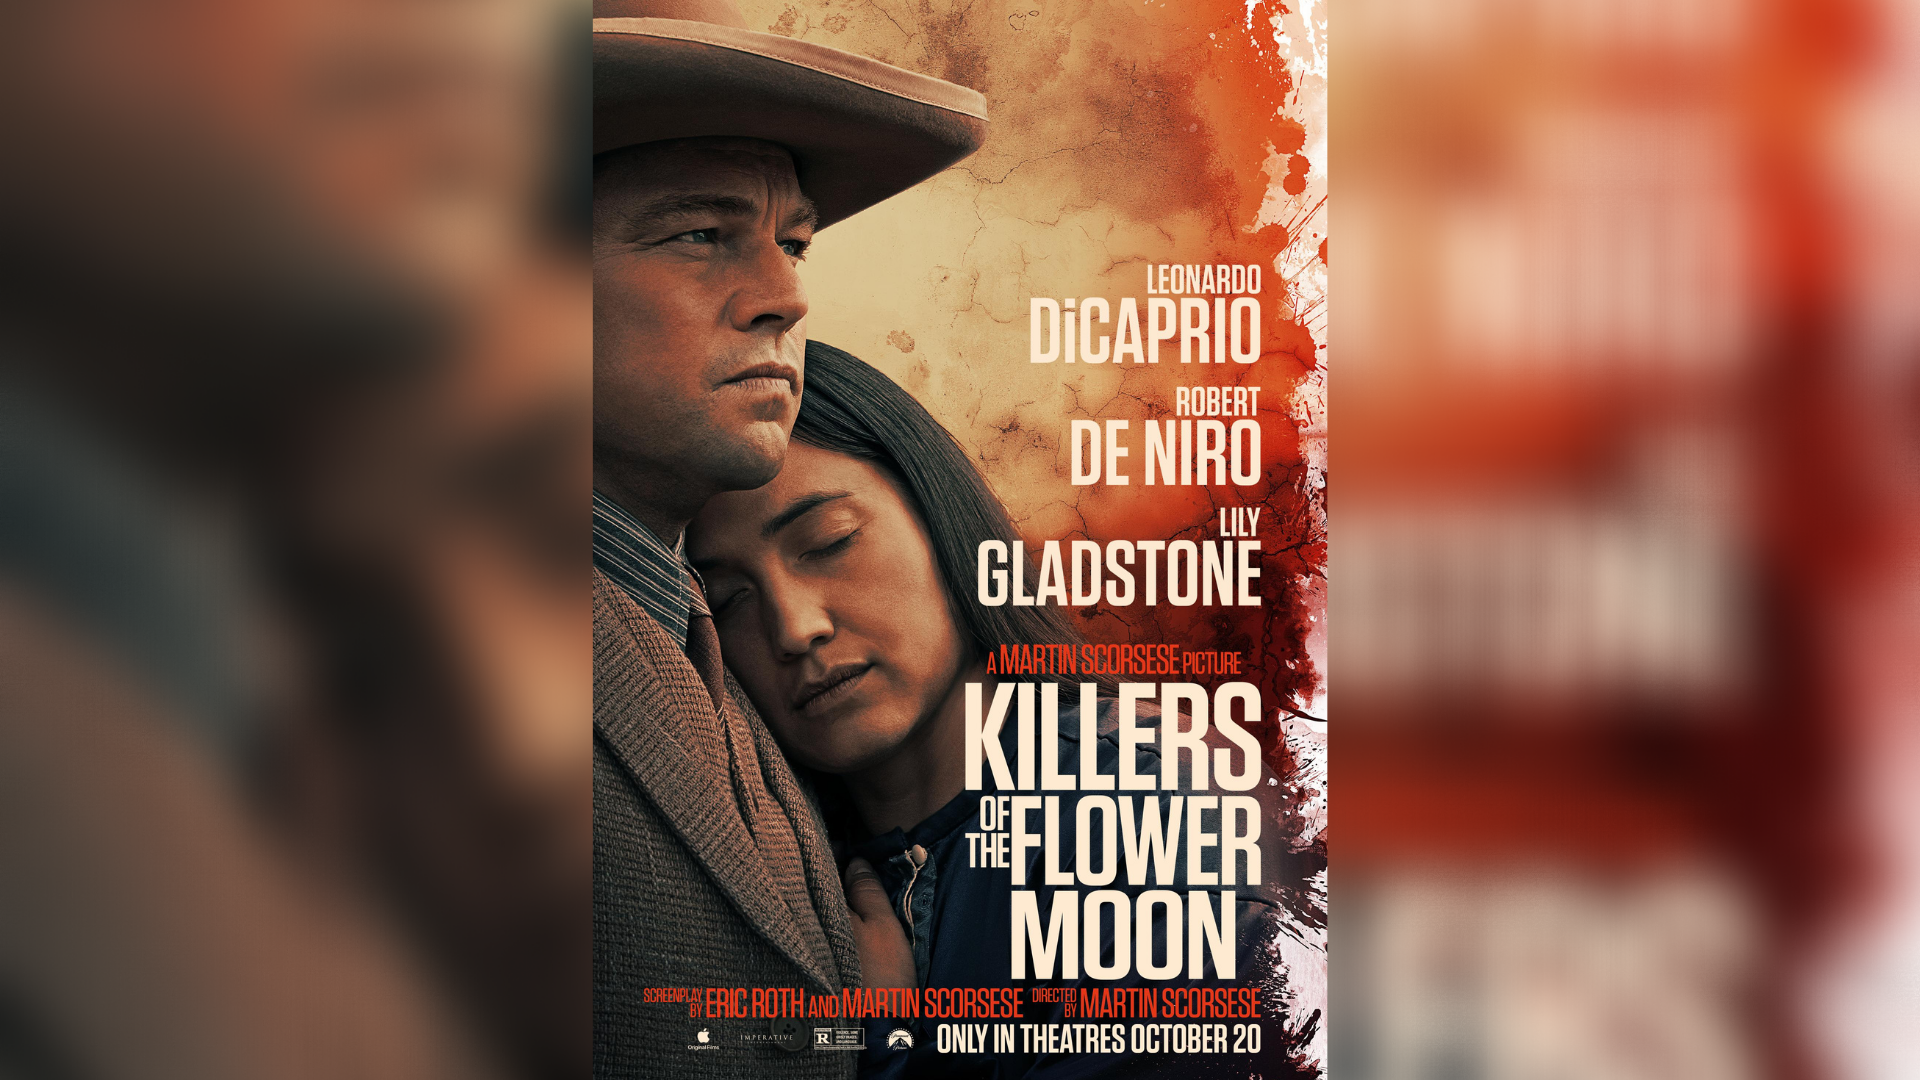 Movie poster for Killers of the Flower Moon, a new film based on the exhaustive research and eventu...